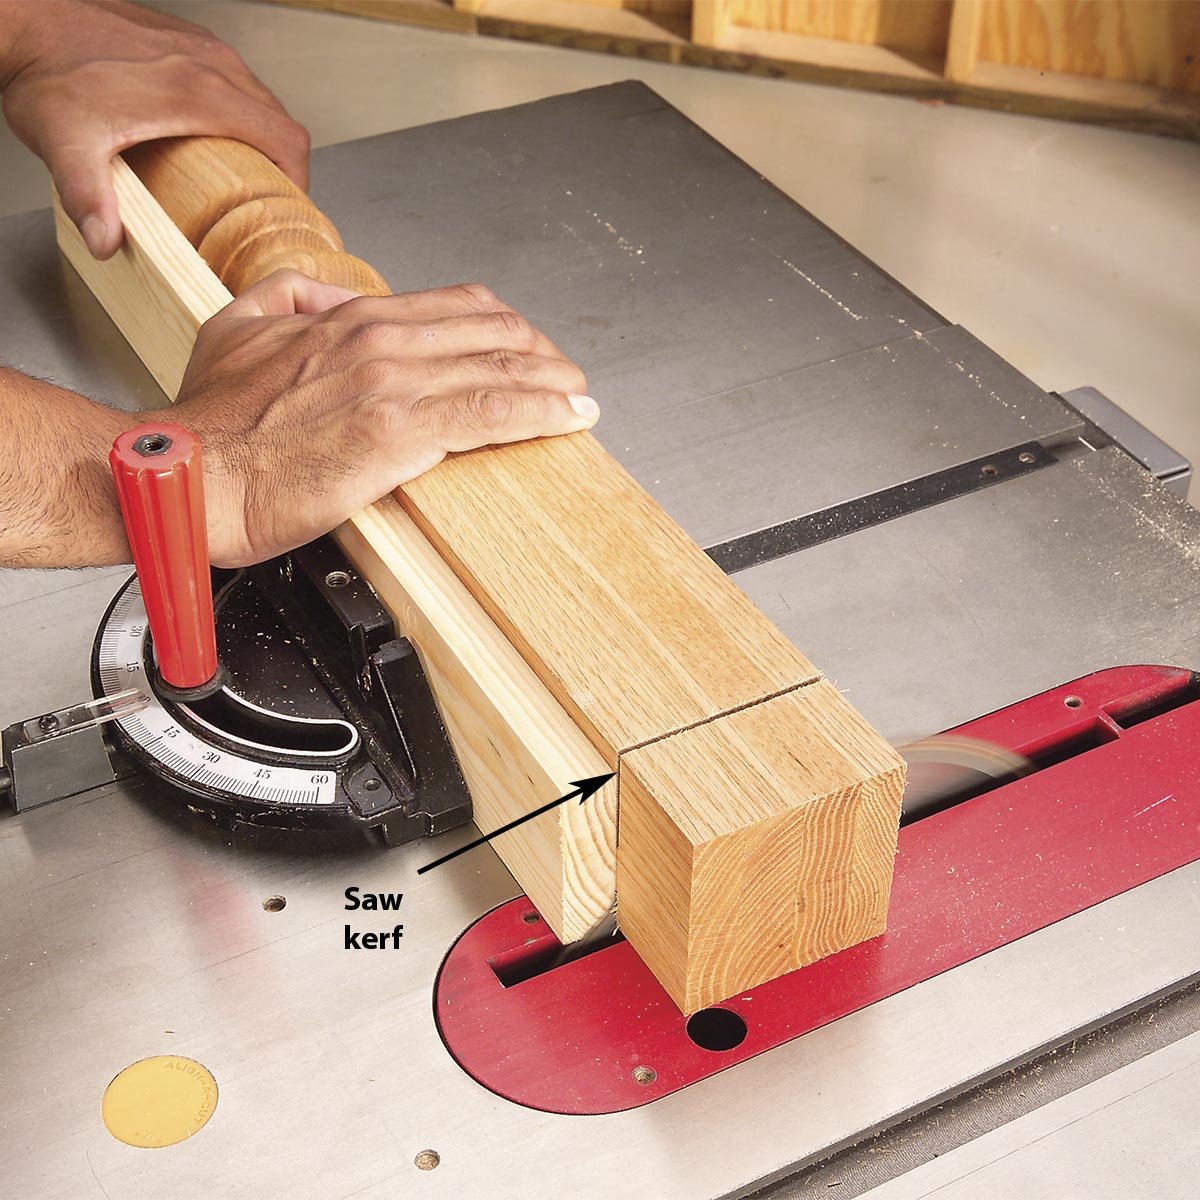 DIY tips: How to make fewer mistakes in
woodworking